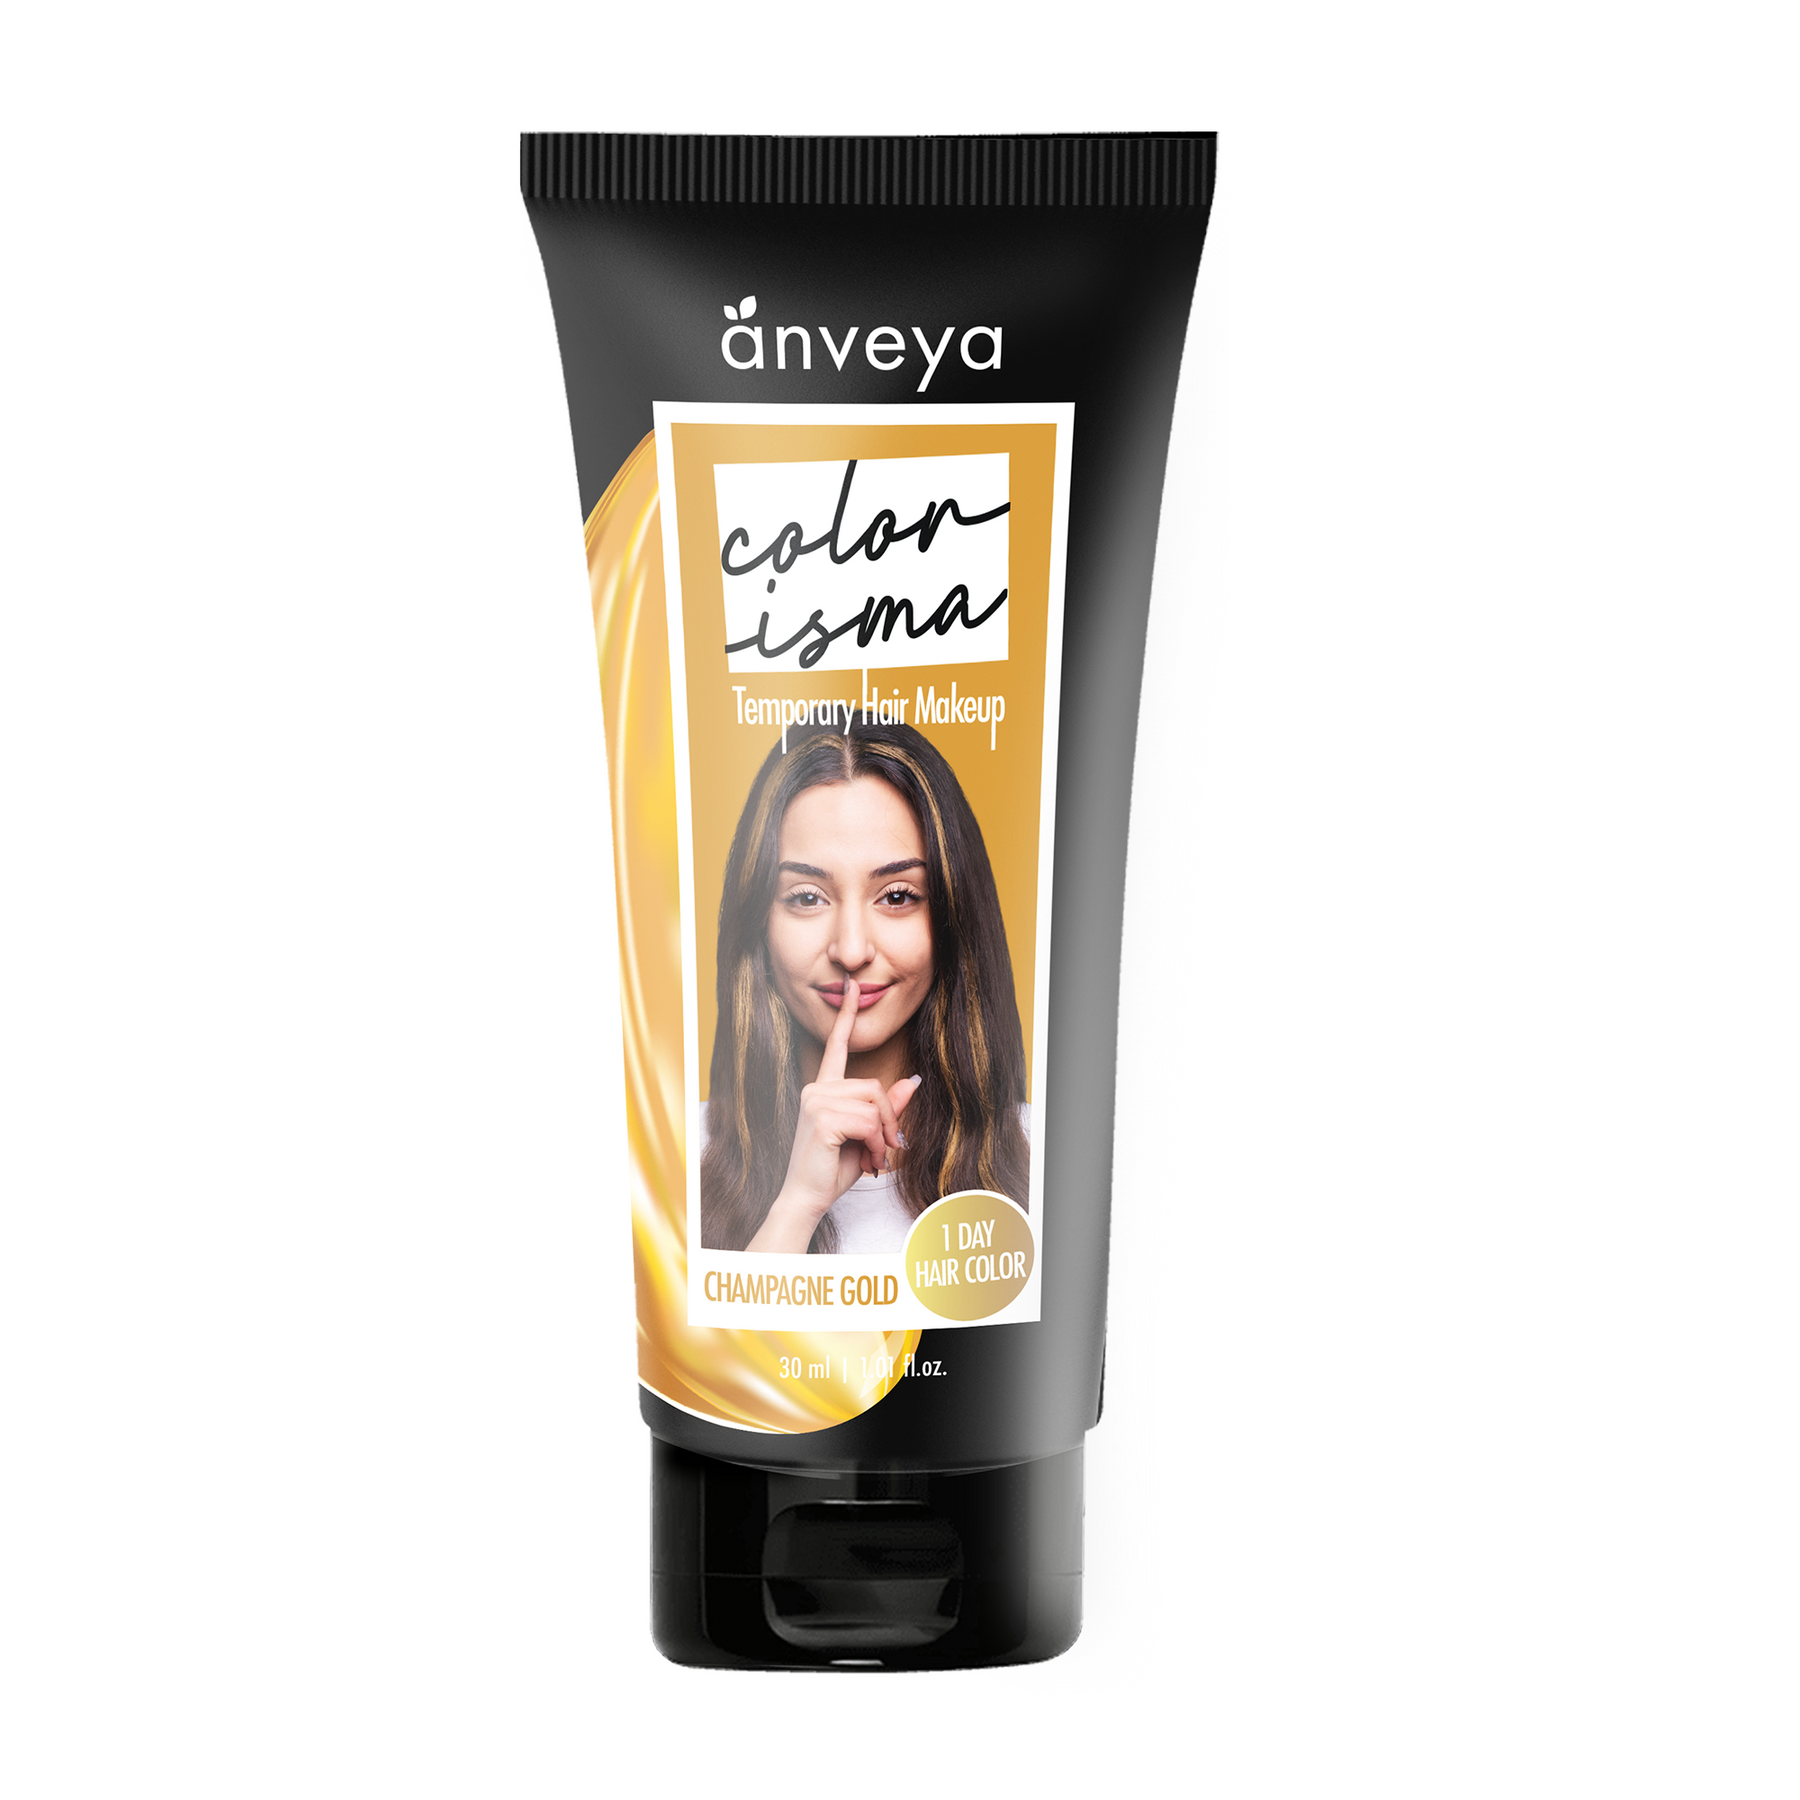 Anveya Colorisma Champagne Gold Temporary Hair Color, 30ml